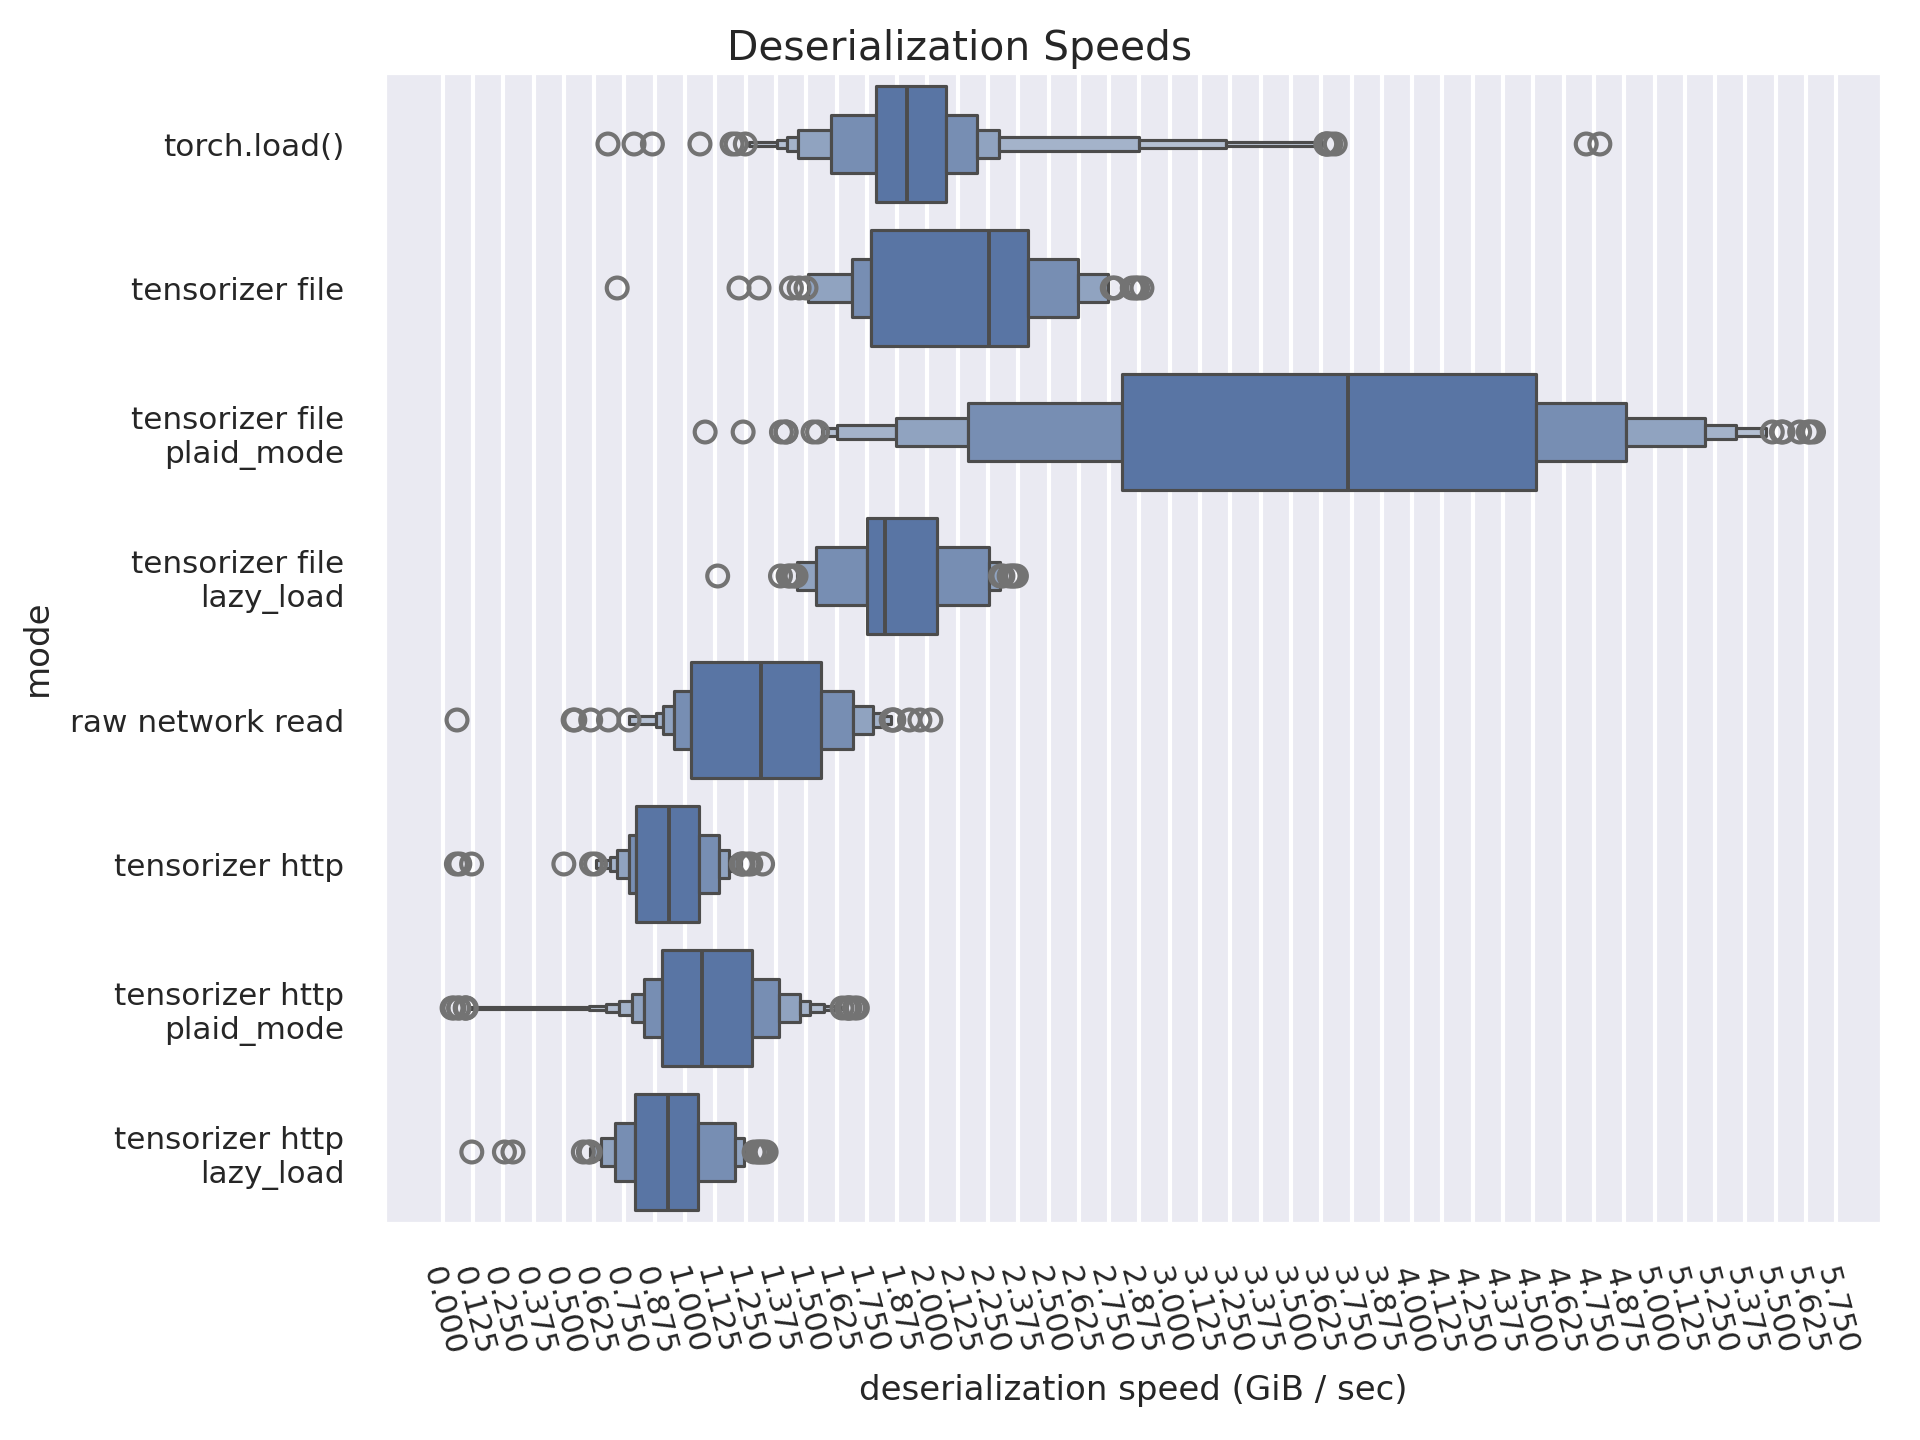 A letter-value plot comparing 7 deserialization modes and their respective deserialization speeds with a granularity of 0.125 GiB/sec. For local files, "torch.load()" has a median speed between 1.875 and 2.000 GiB/sec; "tensorizer file" has a median of 2.250; "tensorizer file, plaid_mode" has a median of about 3.750; "tensorizer file, lazy_load" has a median between 1.750 and 1.875. The raw network speed is also listed on the chart with a median between 1.250 and 1.375. For HTTP streaming, "tensorizer http" has a median between 0.875 and 1.000; "tensorizer http, plaid_mode" has a median between 1.000 and 1.125; and "tensorizer http, lazy_load" has a median between 0.875 and 1.000.